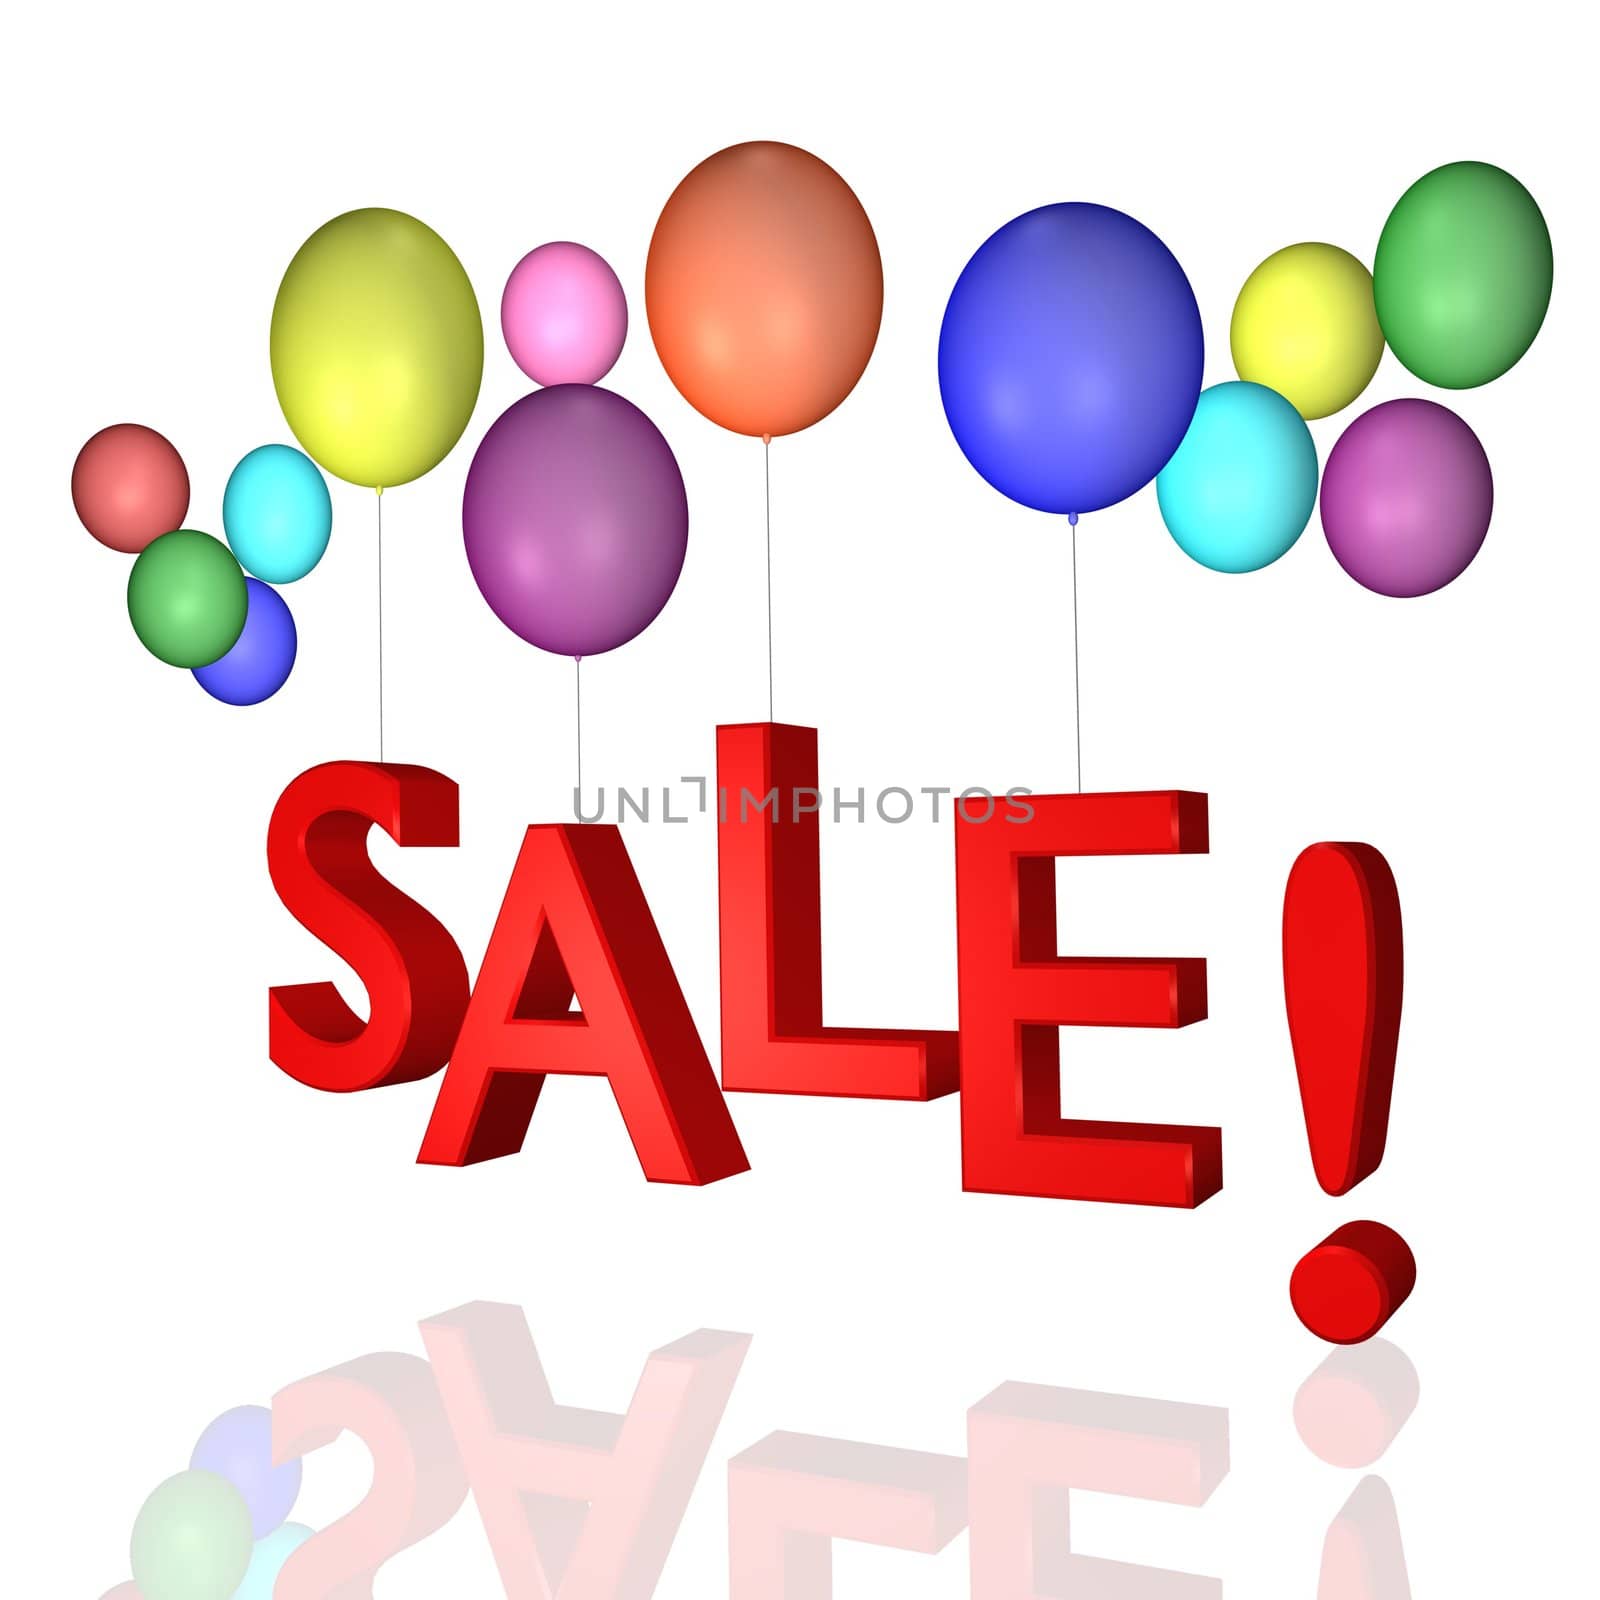 3D word "SALE" with balloons.